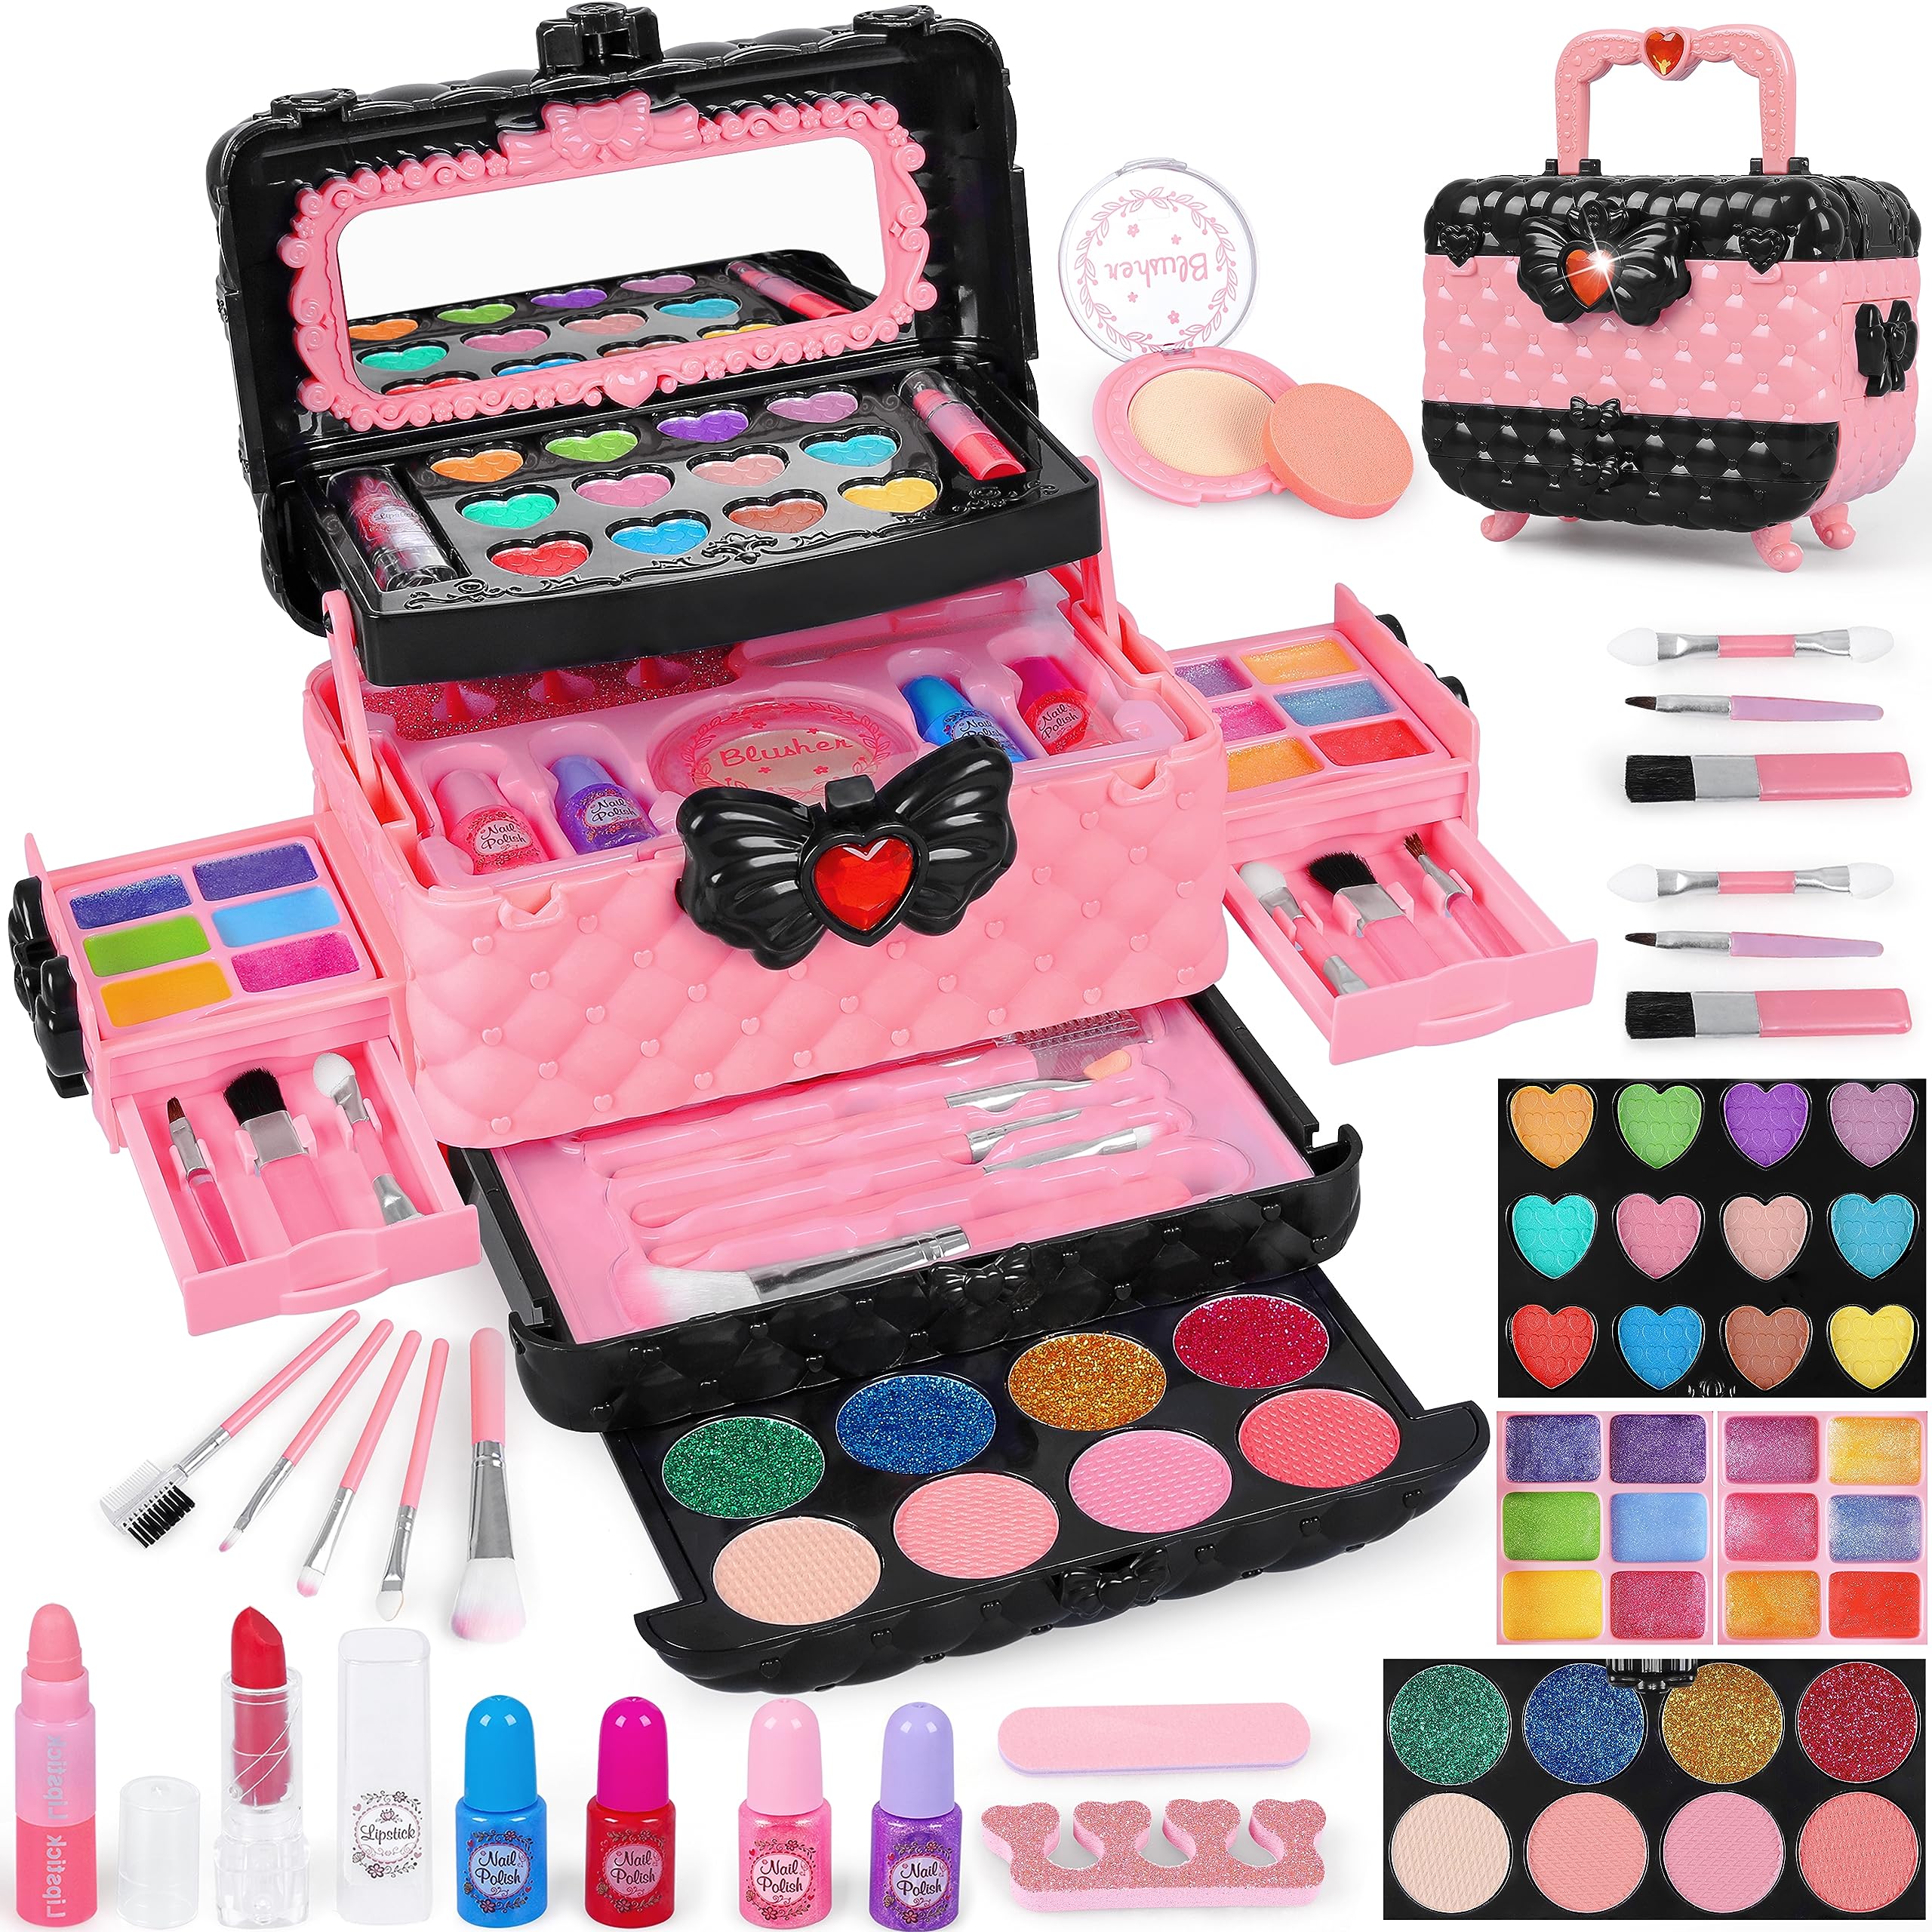 54 Pcs Kids Makeup Kit for Girls, Princess Real Washable Pretend Play Cosmetic Set Toys with Mirror, Non-Toxic & Safe, Birthday Gifts for 3 4 5 6 7 8 9 10 Years Old Girls Kids (Pink)